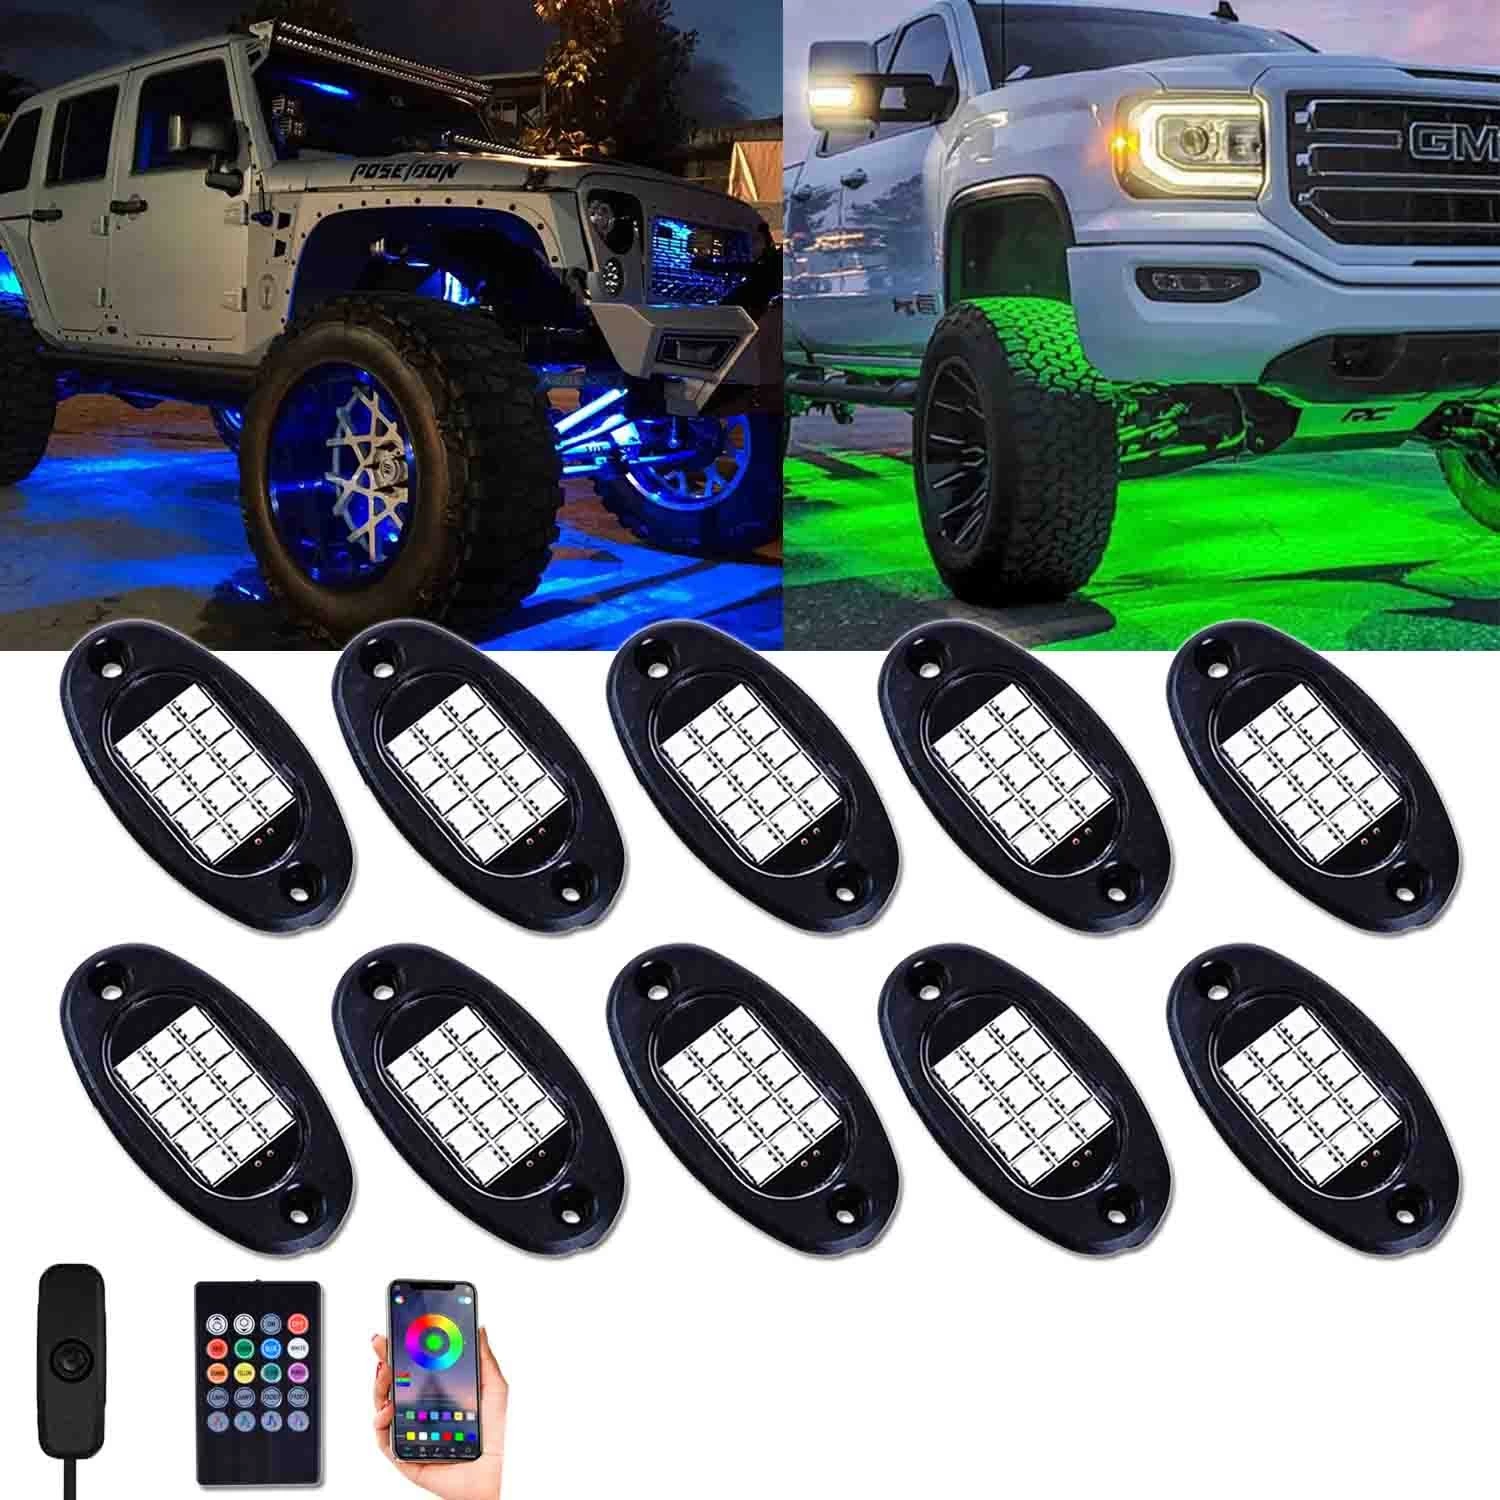 China Unionlux RGB LED Rock Lights 60 LEDs Multicolor Underglow Neon Lights Waterproof Aluminum Light Kit with RF/APP Control Music Mode Timing Function for Truck Jeep Off Road Car UTV ATV SUV 10 Packs manufacturer